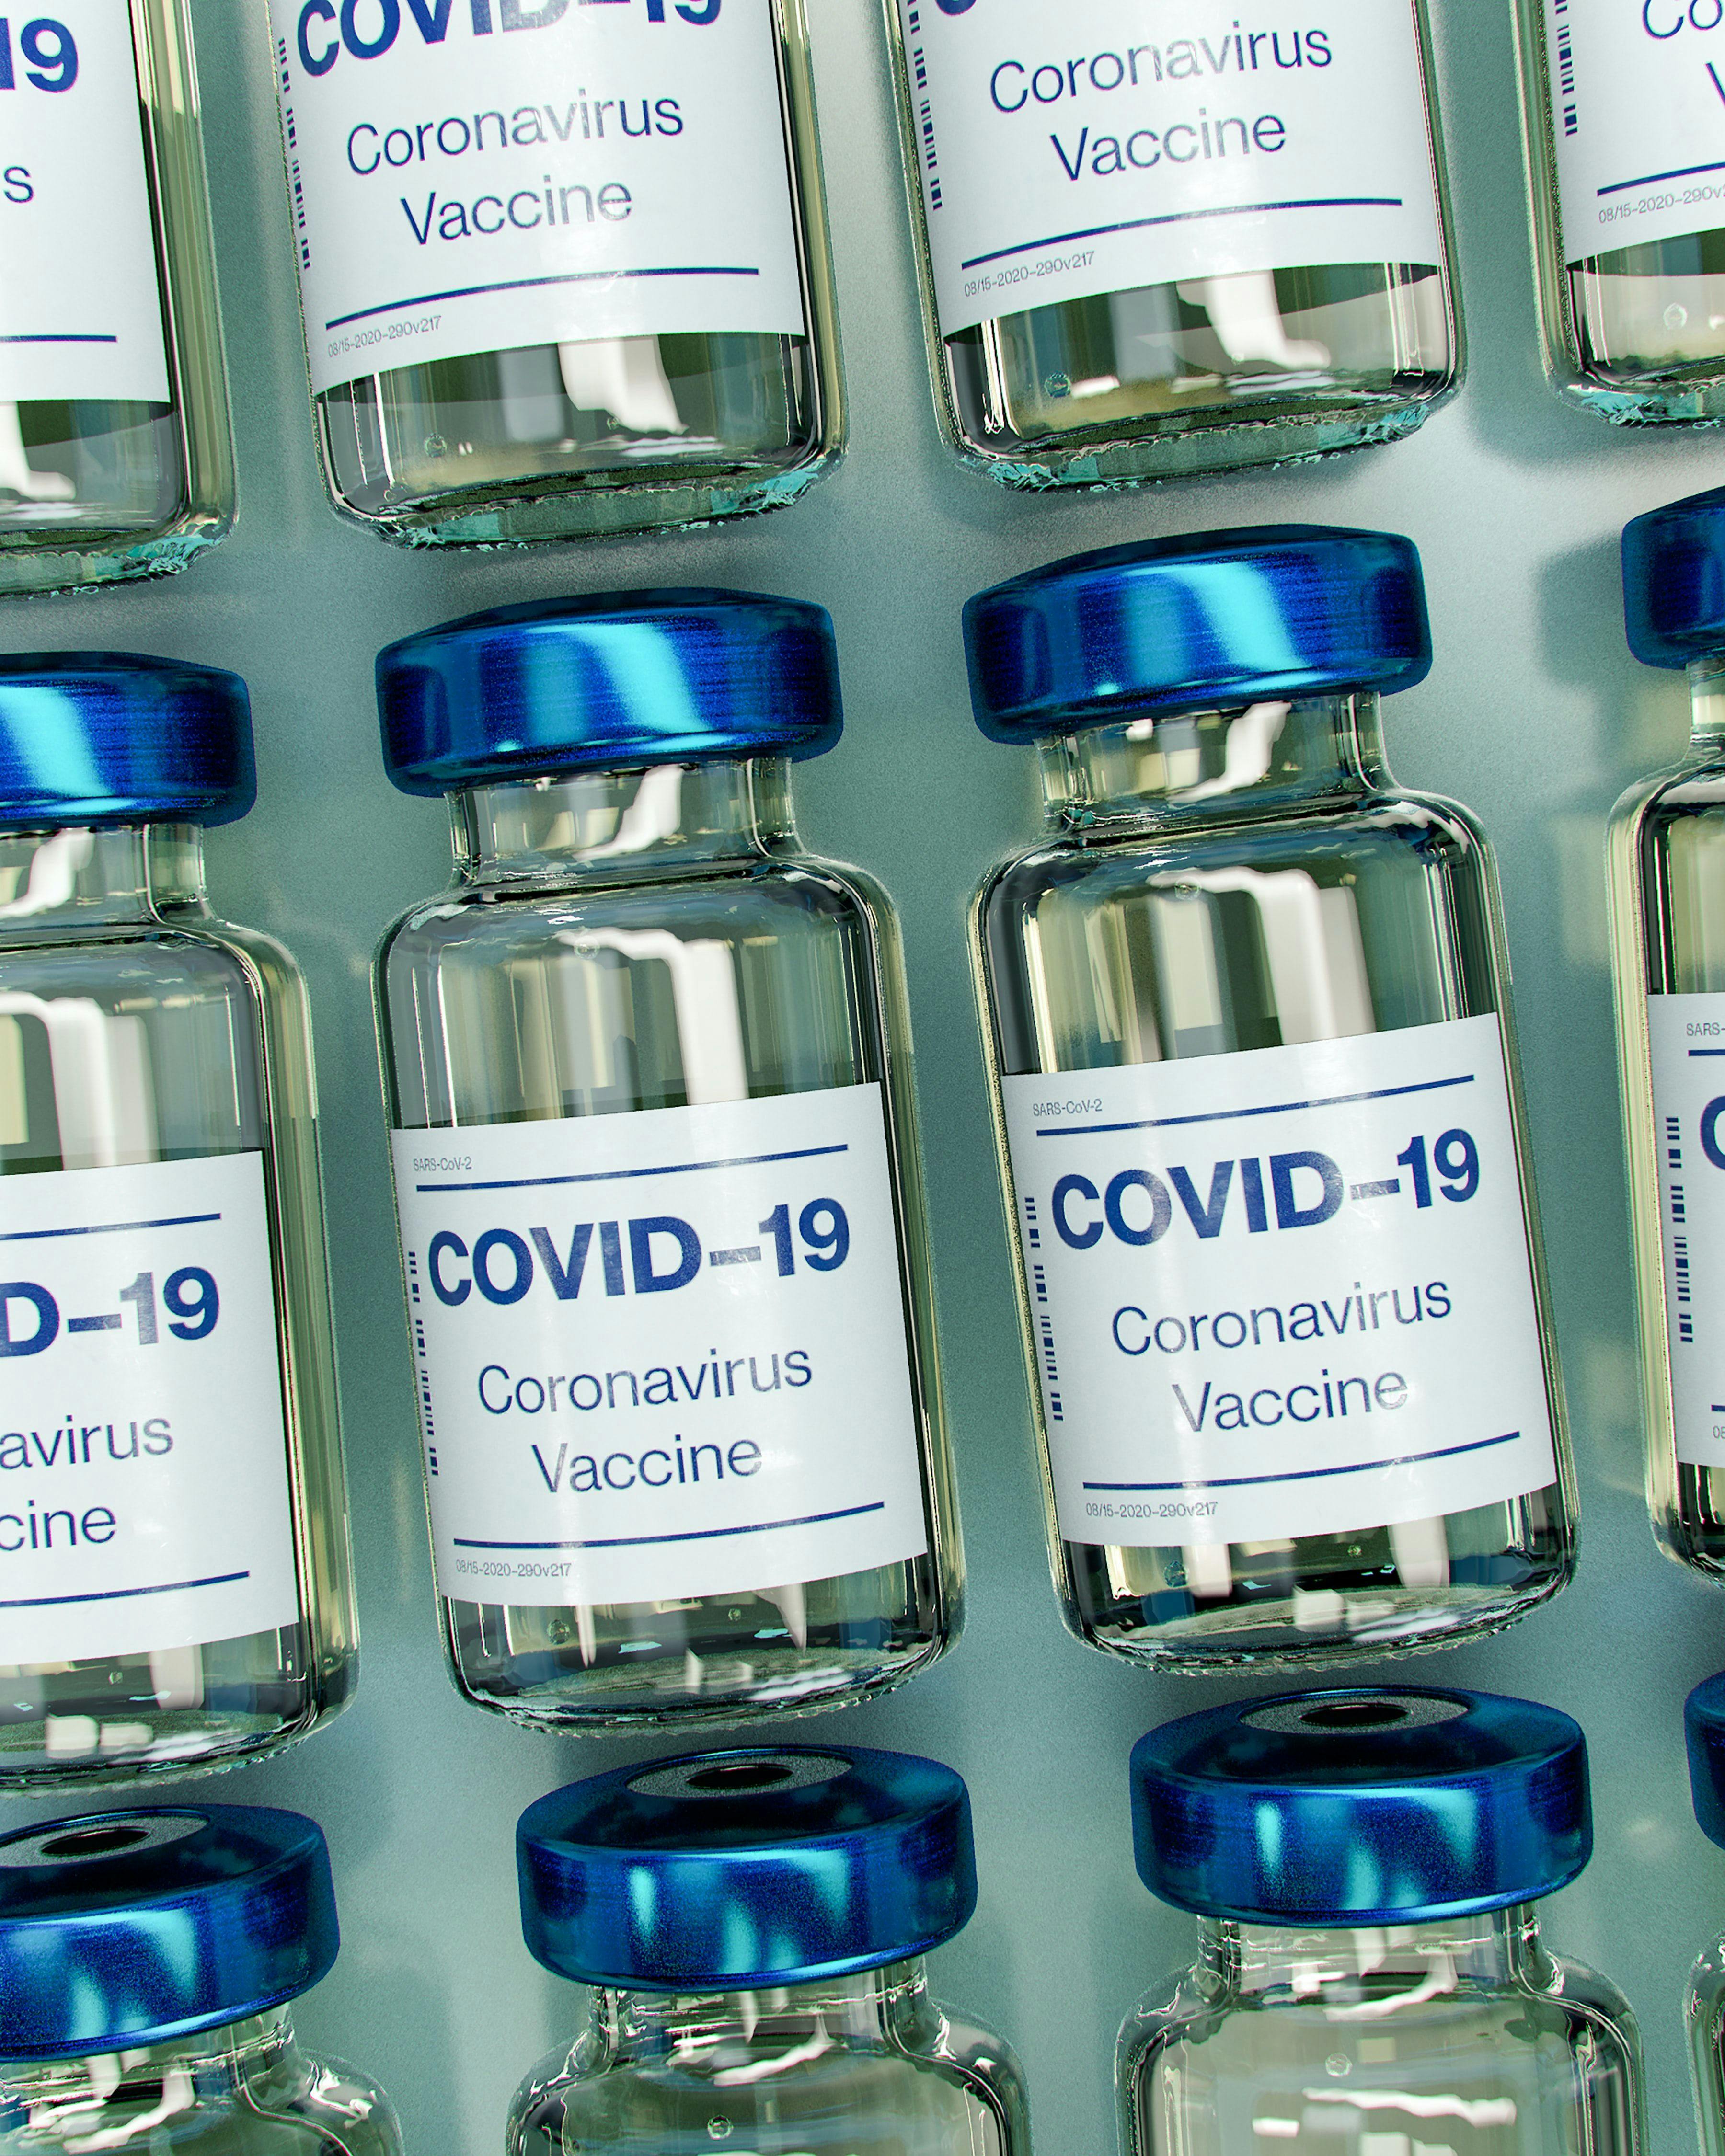 NCCN Guidelines Urge Patients With Cancer to Get a COVID-19 Vaccine, Whichever is Available